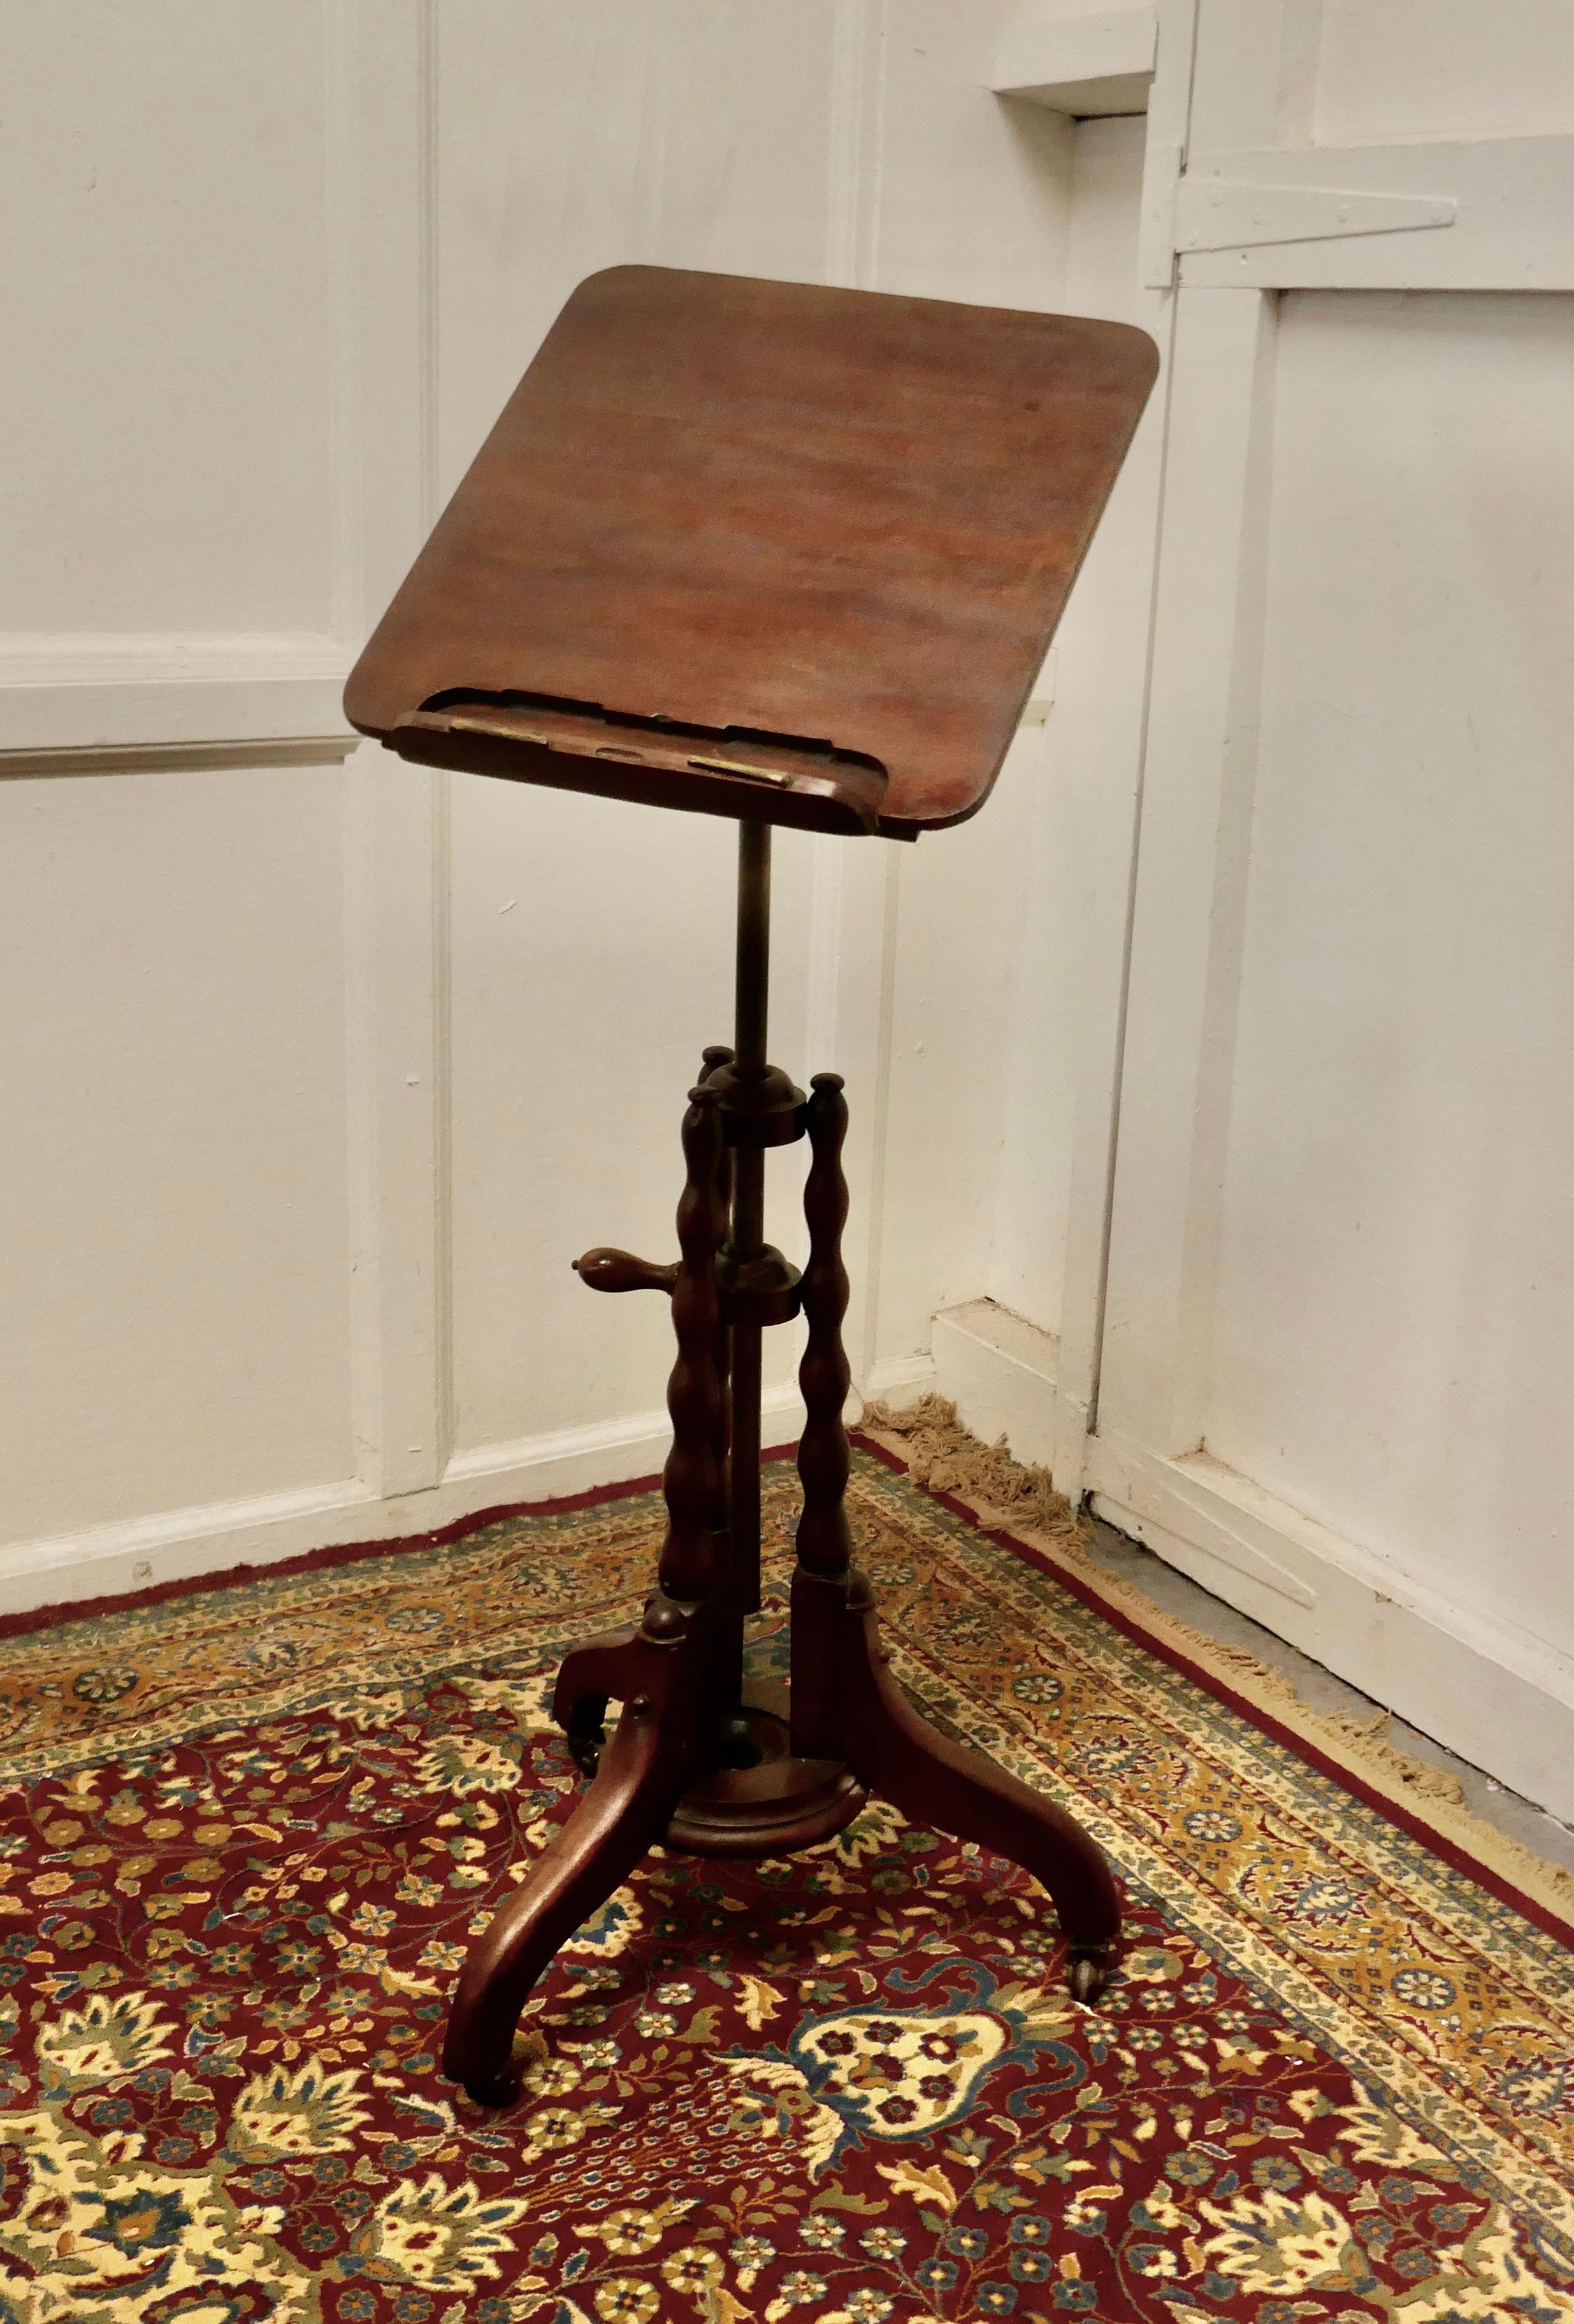 19th century Mahogany reading or music stand

A very fine quality piece, the stand has an attractive bobin turned base with a brass upright column which carries a small mahogany table top, with a concealed book rest with page clasps
The Table top